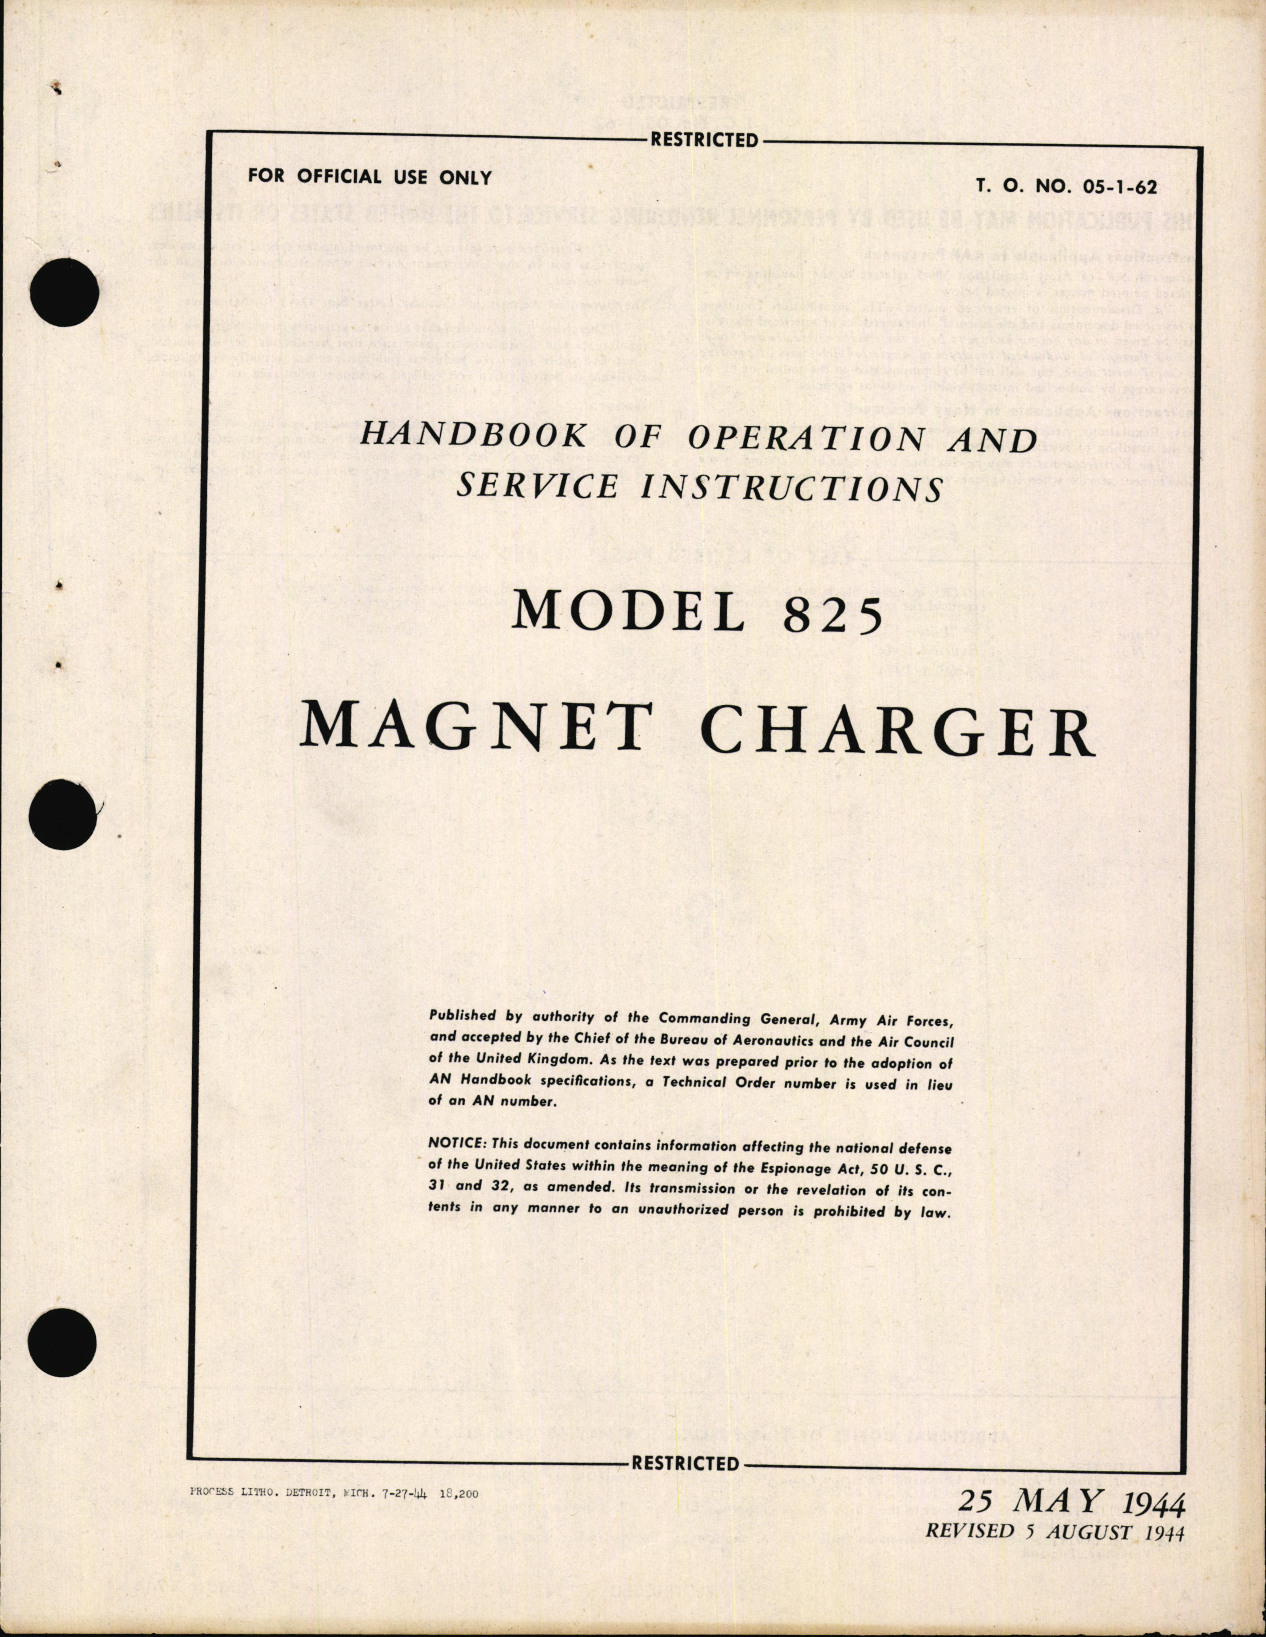 Sample page 1 from AirCorps Library document: Operation and Service Instructions for Model 825 Magnet Charger